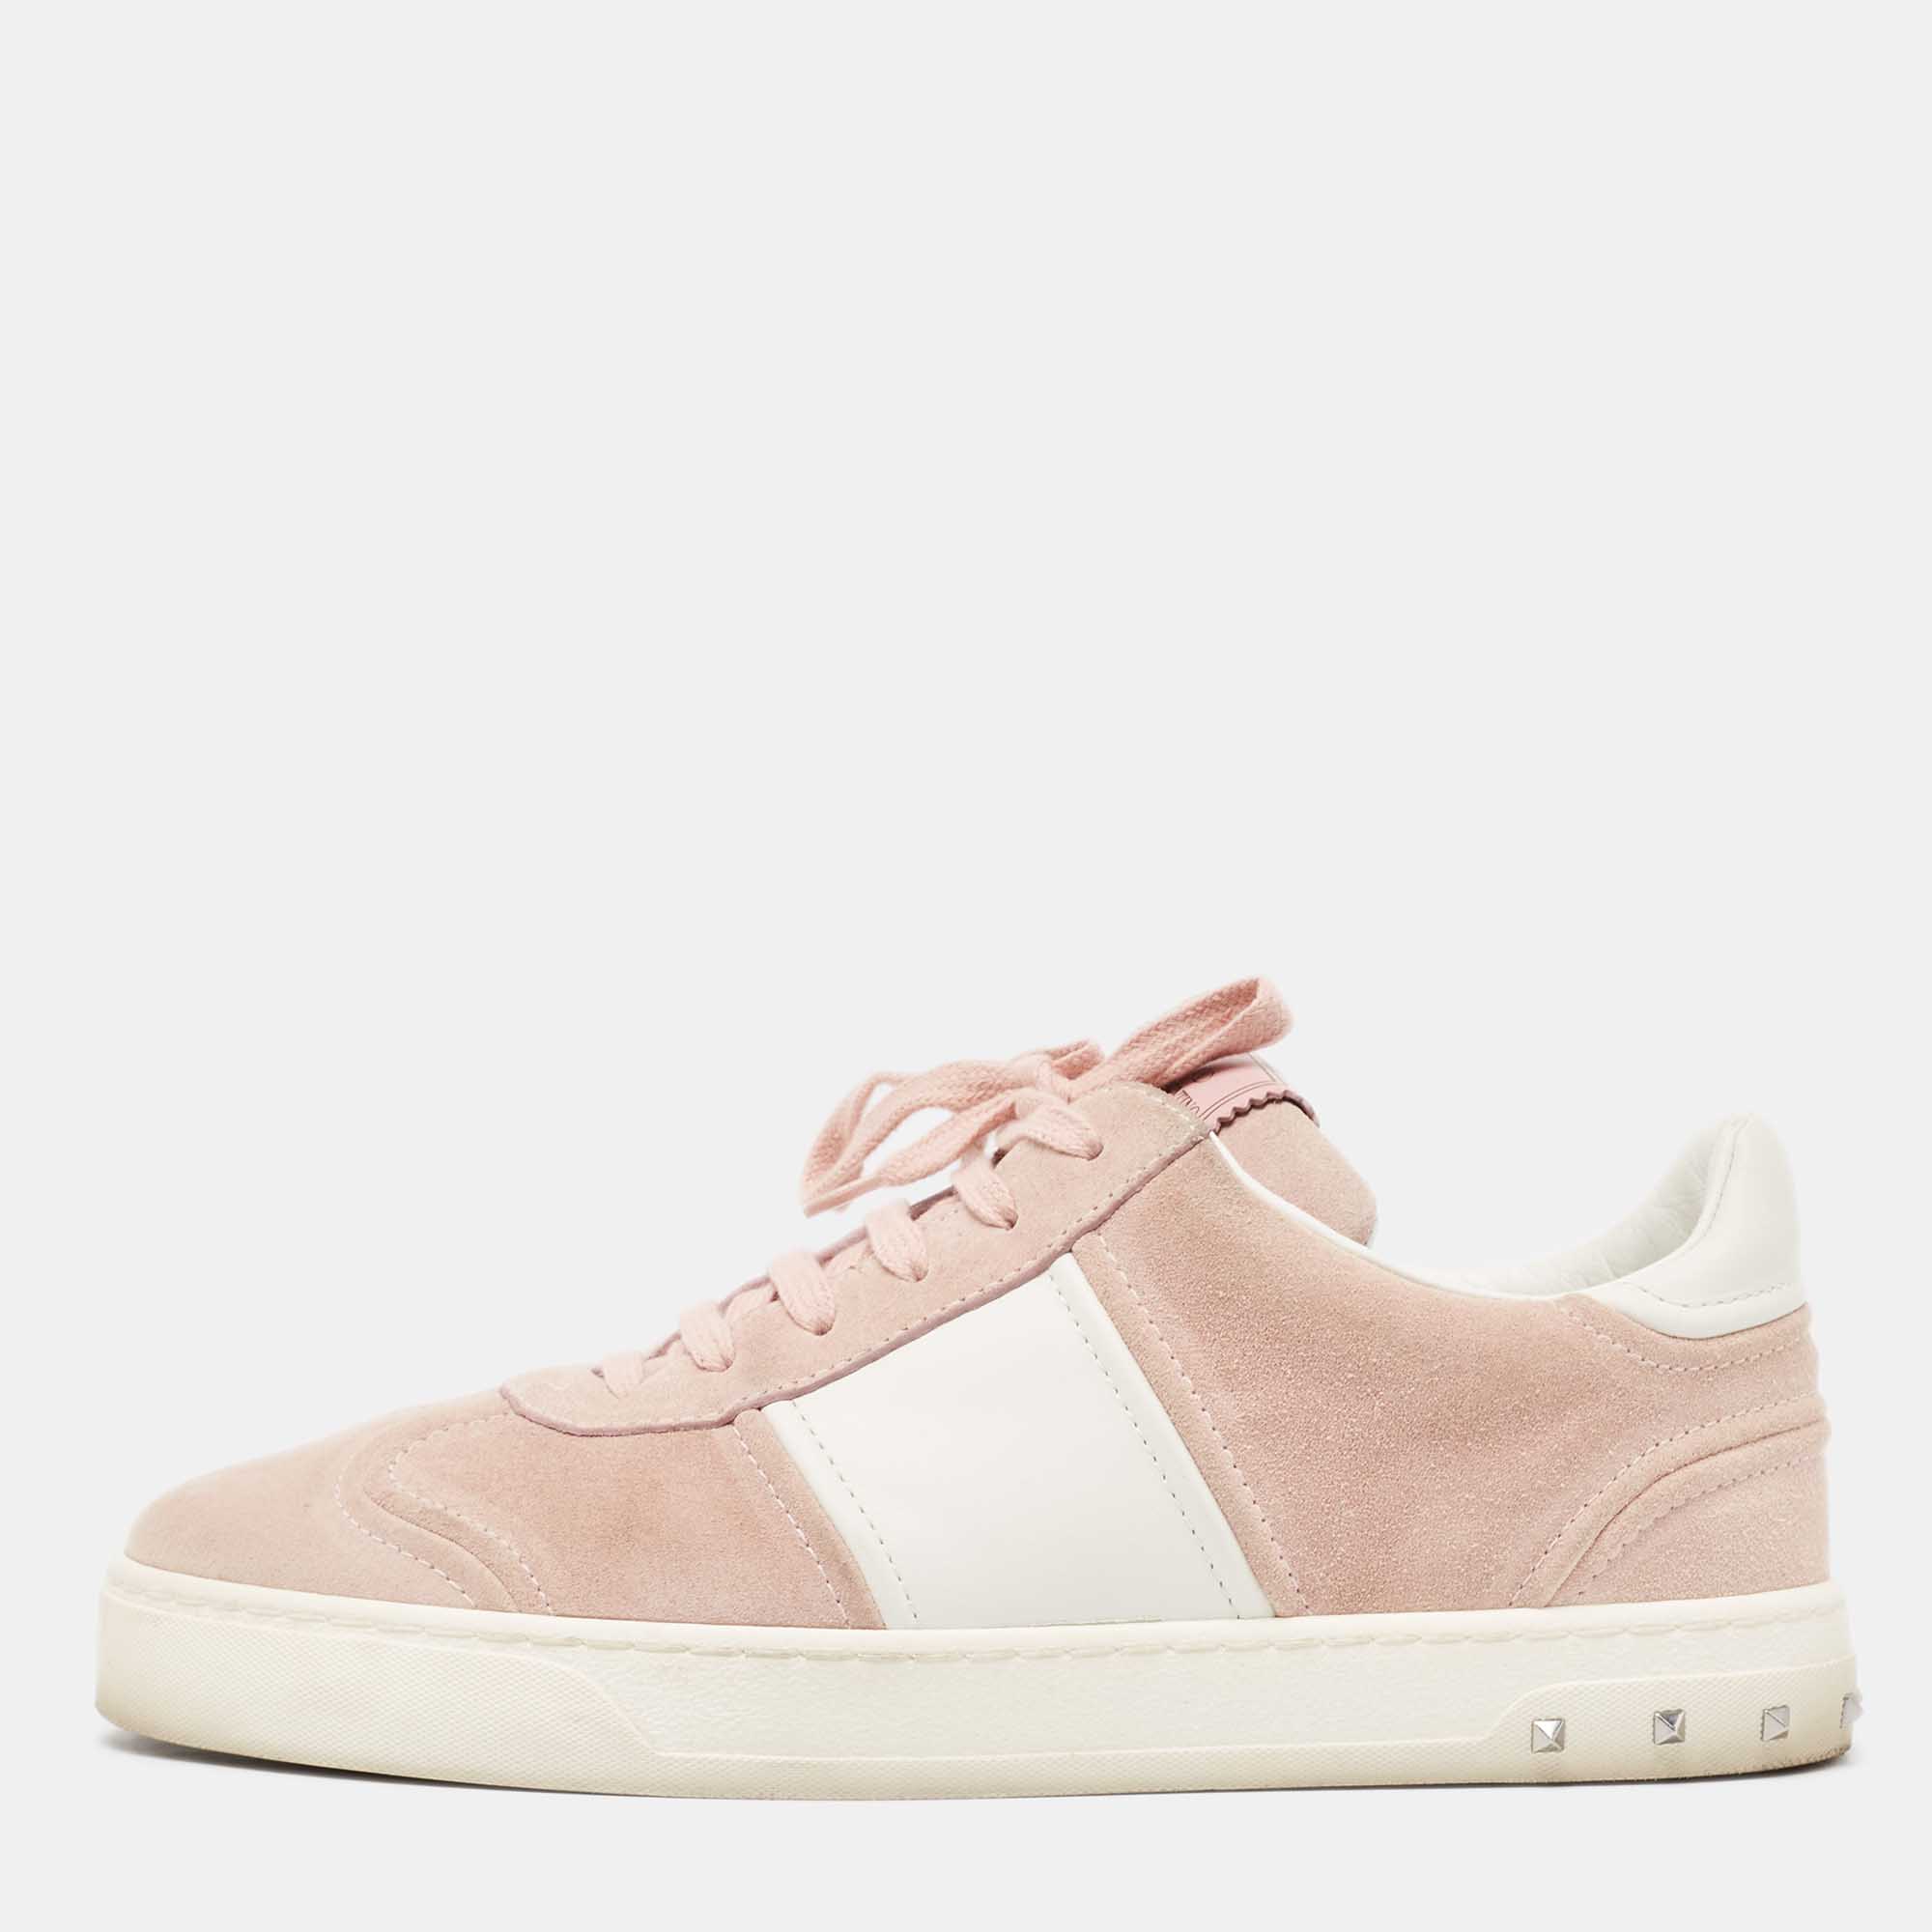 Valentino light pink/white suede and leather fly crew low top sneakers size 39